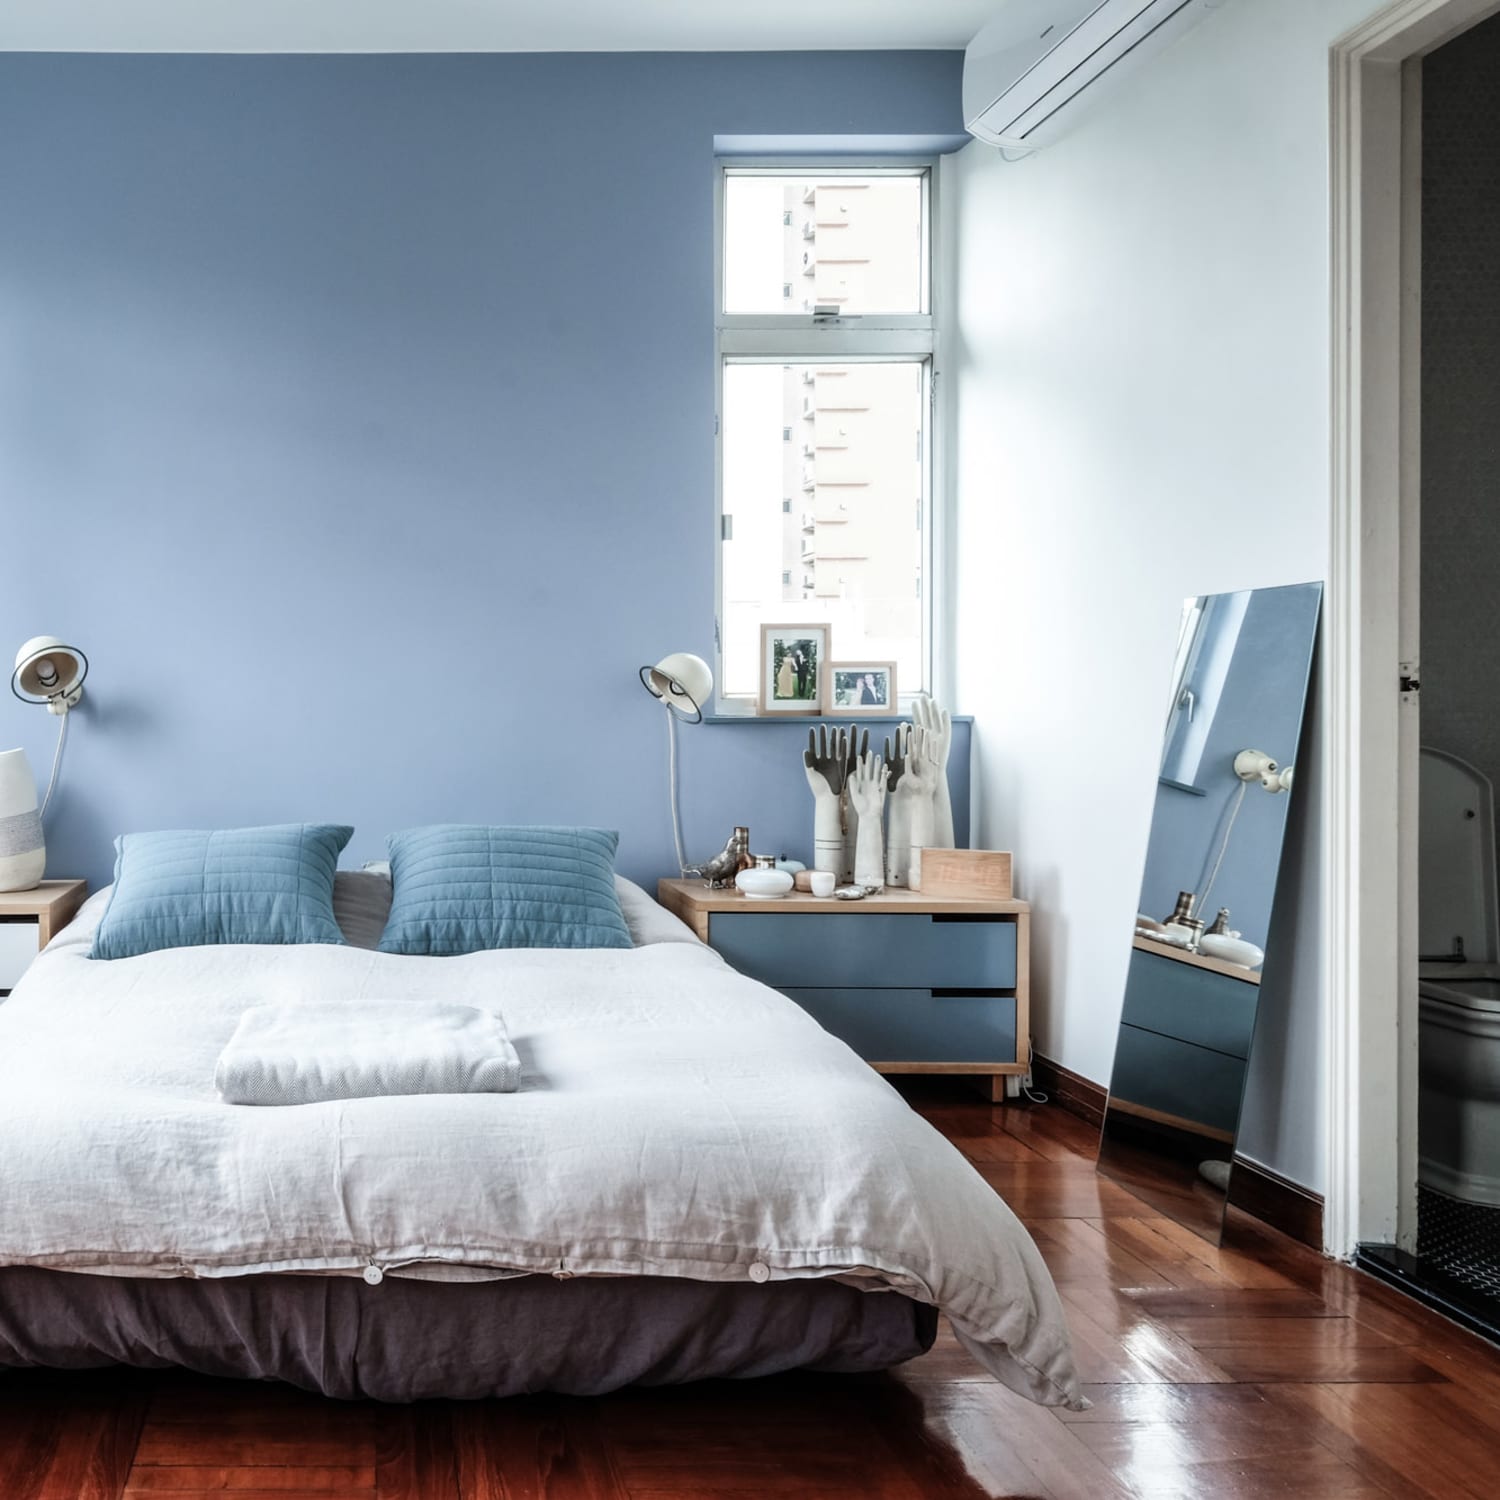 The best blue paint according to design experts